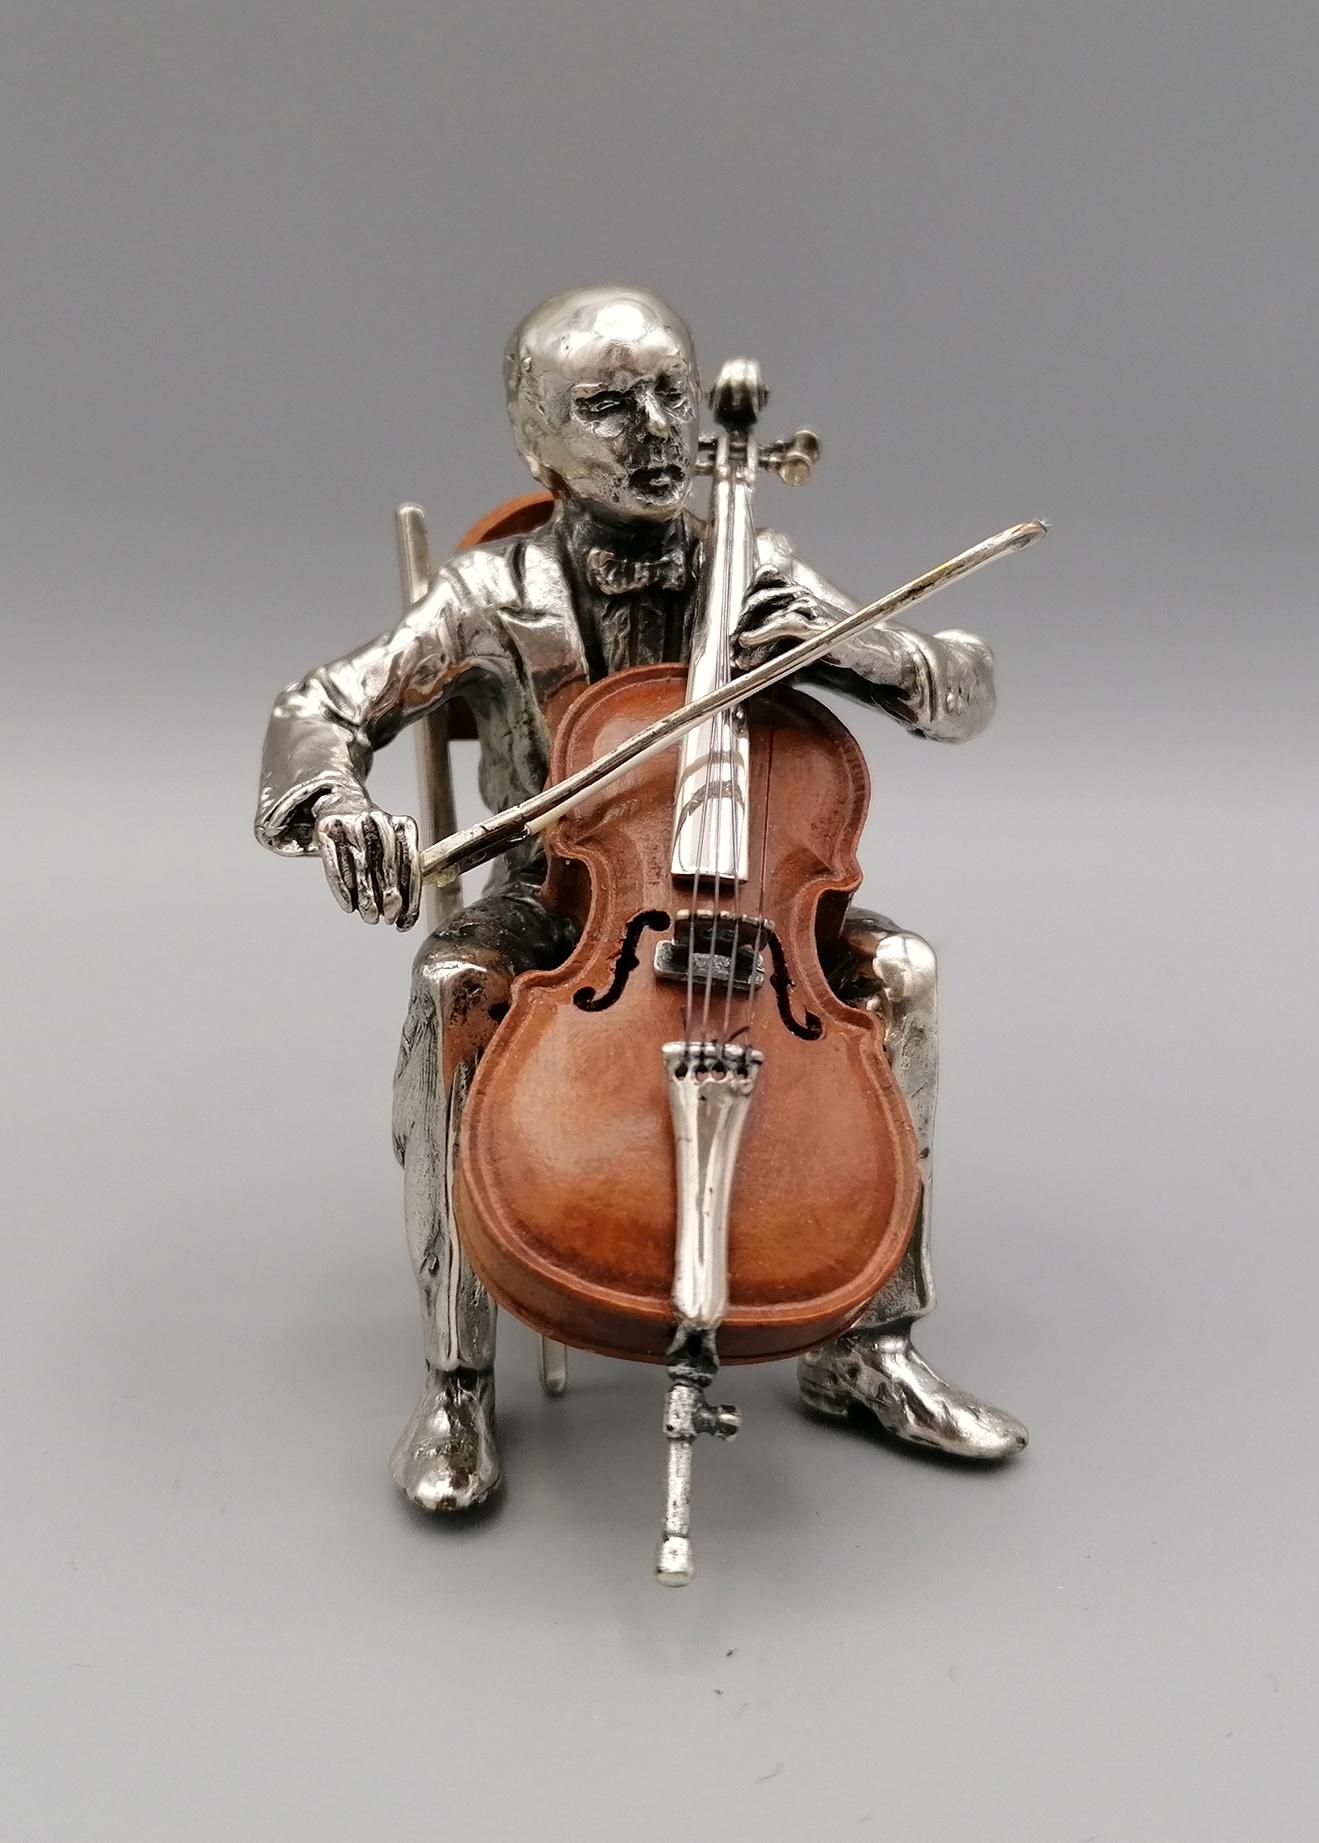 Cello player in 800 solid silver. The cello is in briar with silver details.
The cello bow is in silver.
The player and the cello are positioned on a briar and solid silver chair.
Silver 150 grams circa.